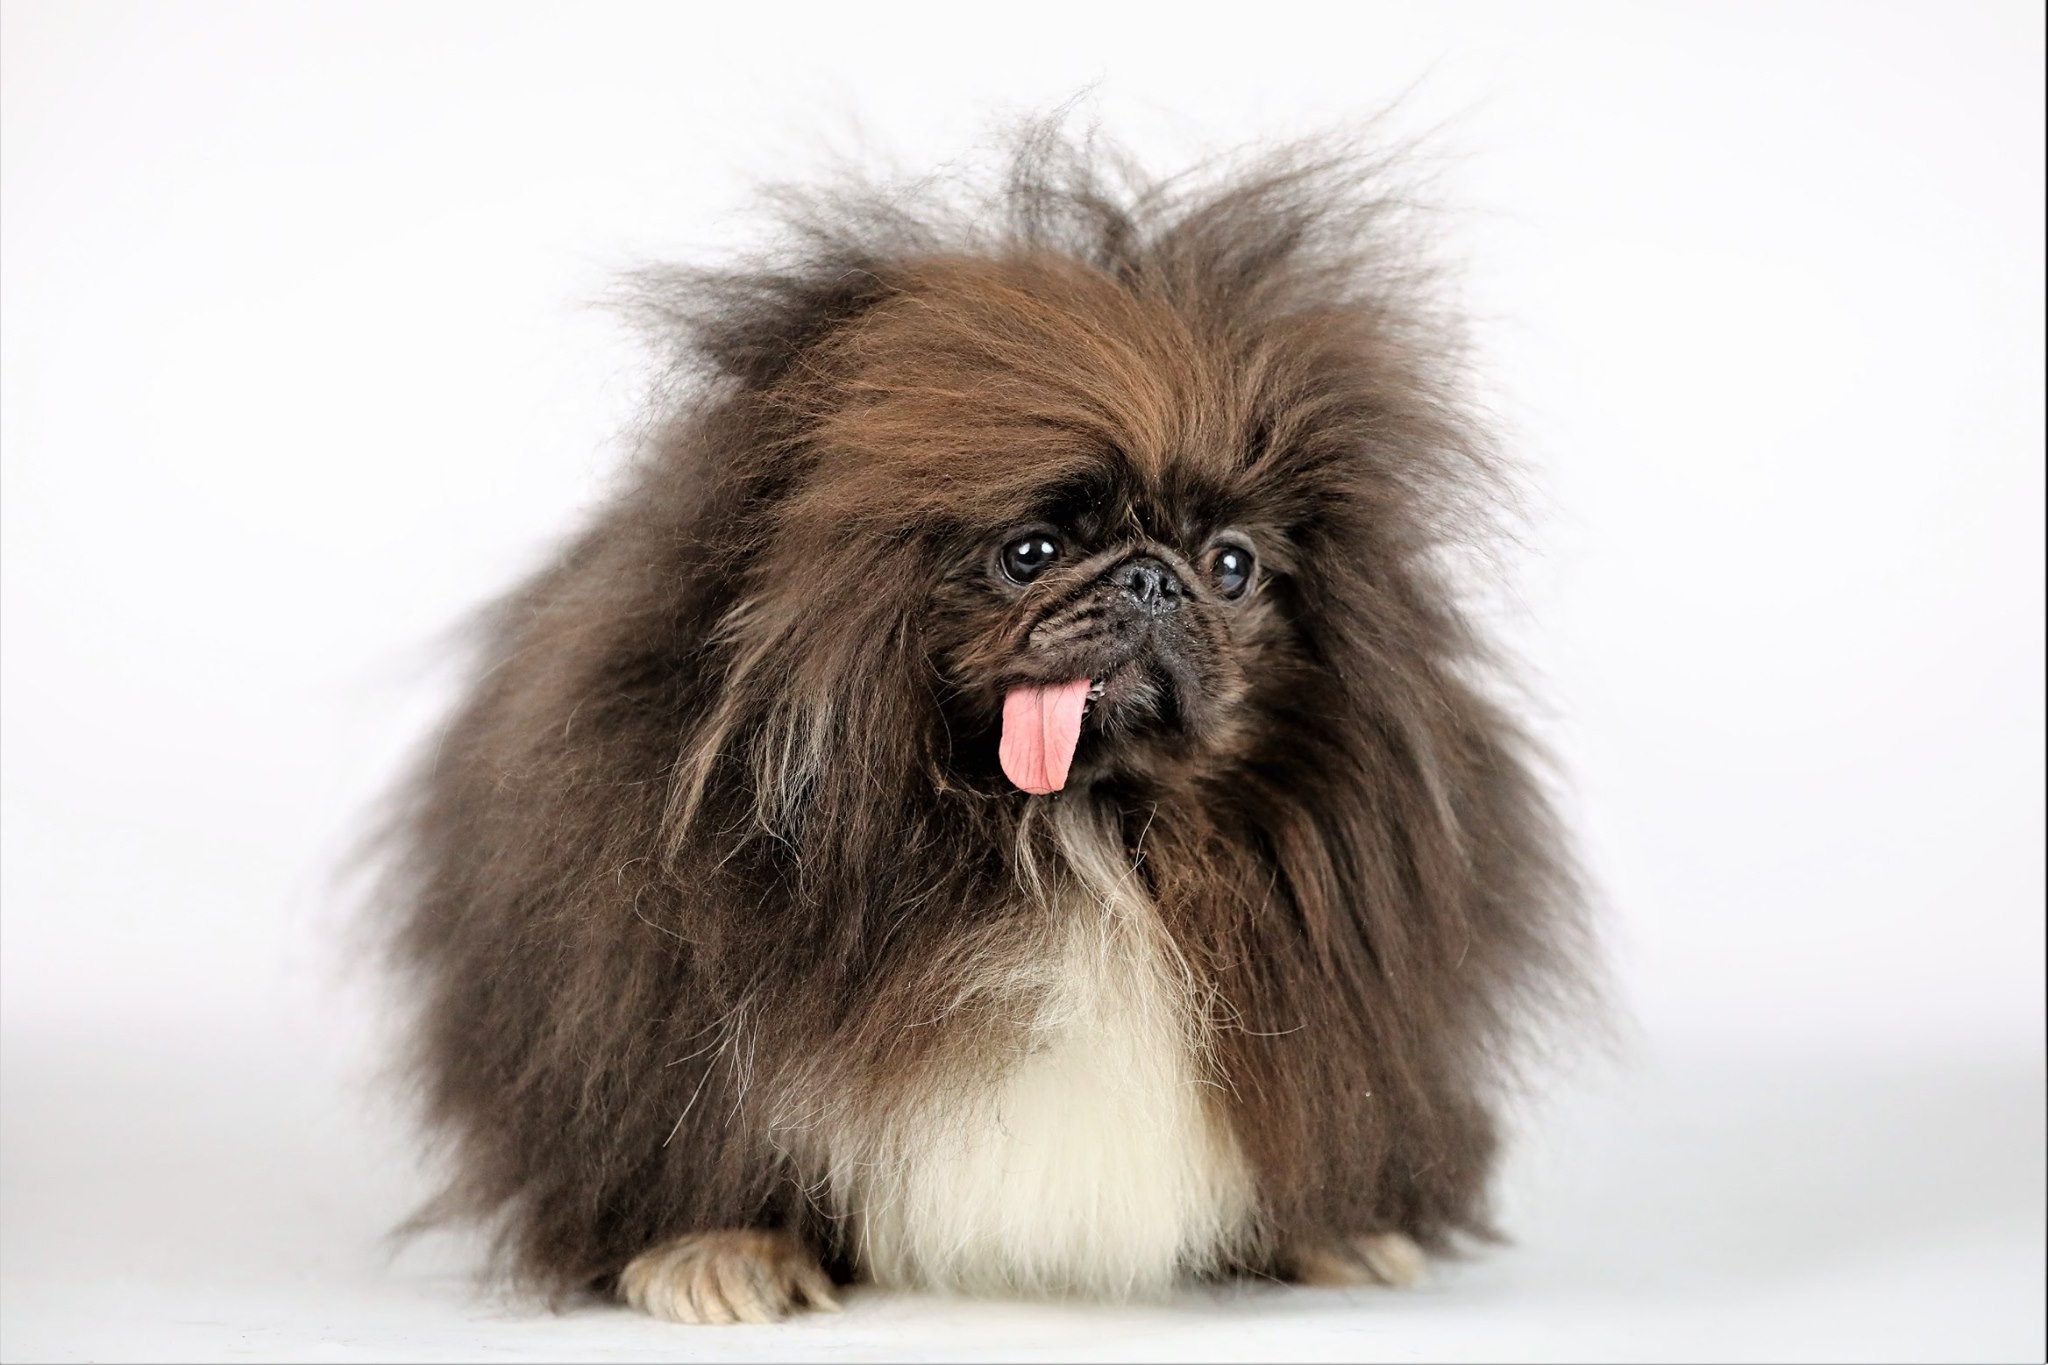  A photo of Wild Thang, a Pekingese dog who was named the ugliest dog in the world.